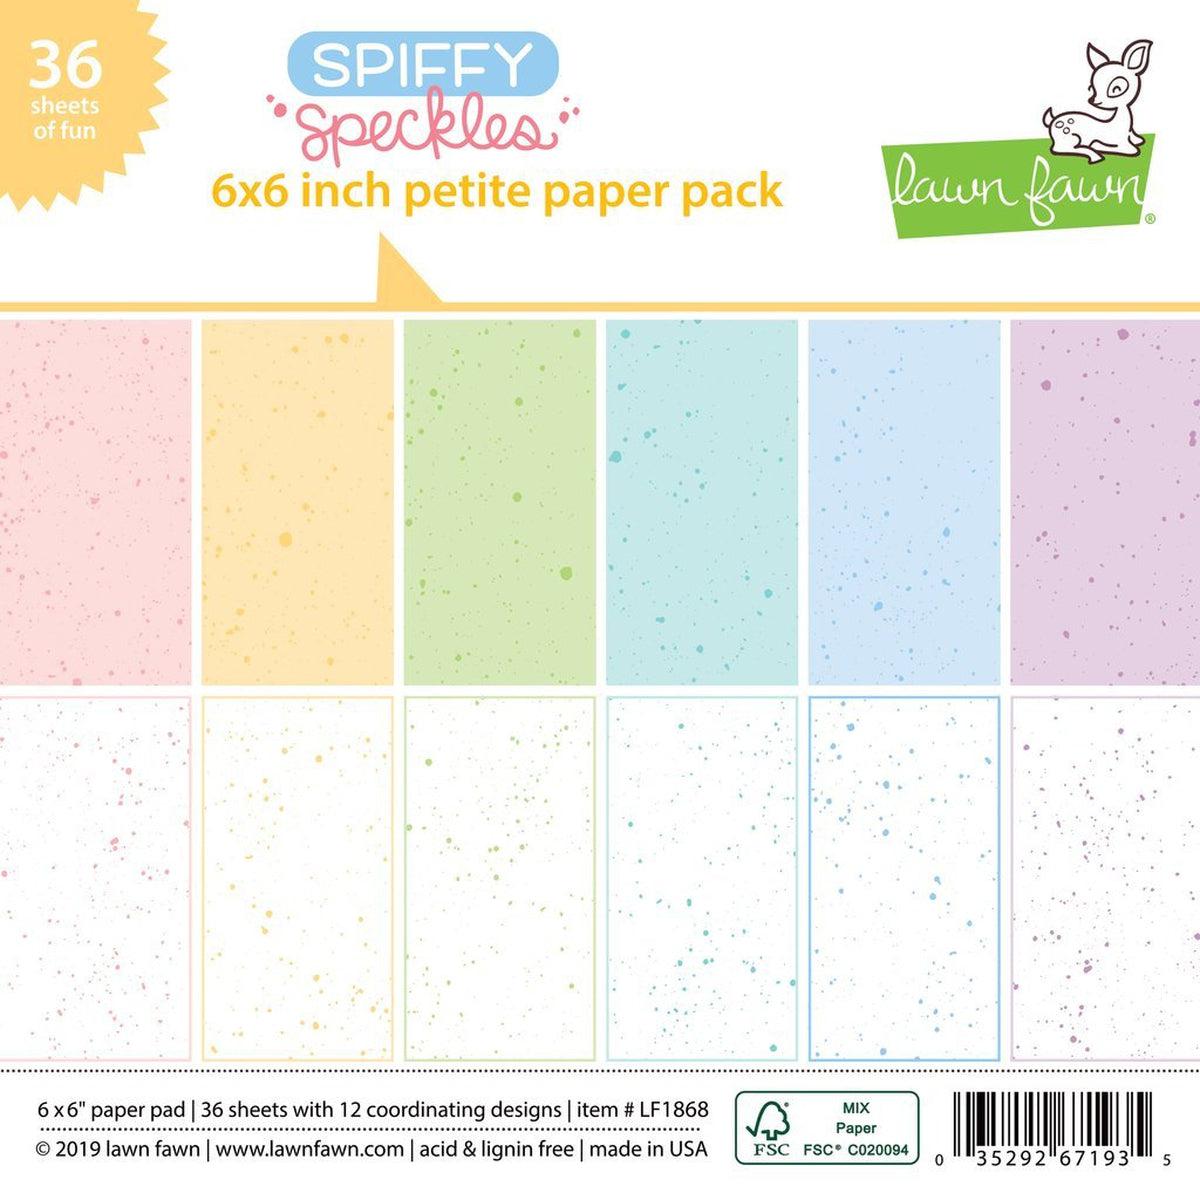 Spiffy Speckles Petite Paper Pack 6"X6" by Lawn Fawn - Kat Scrappiness